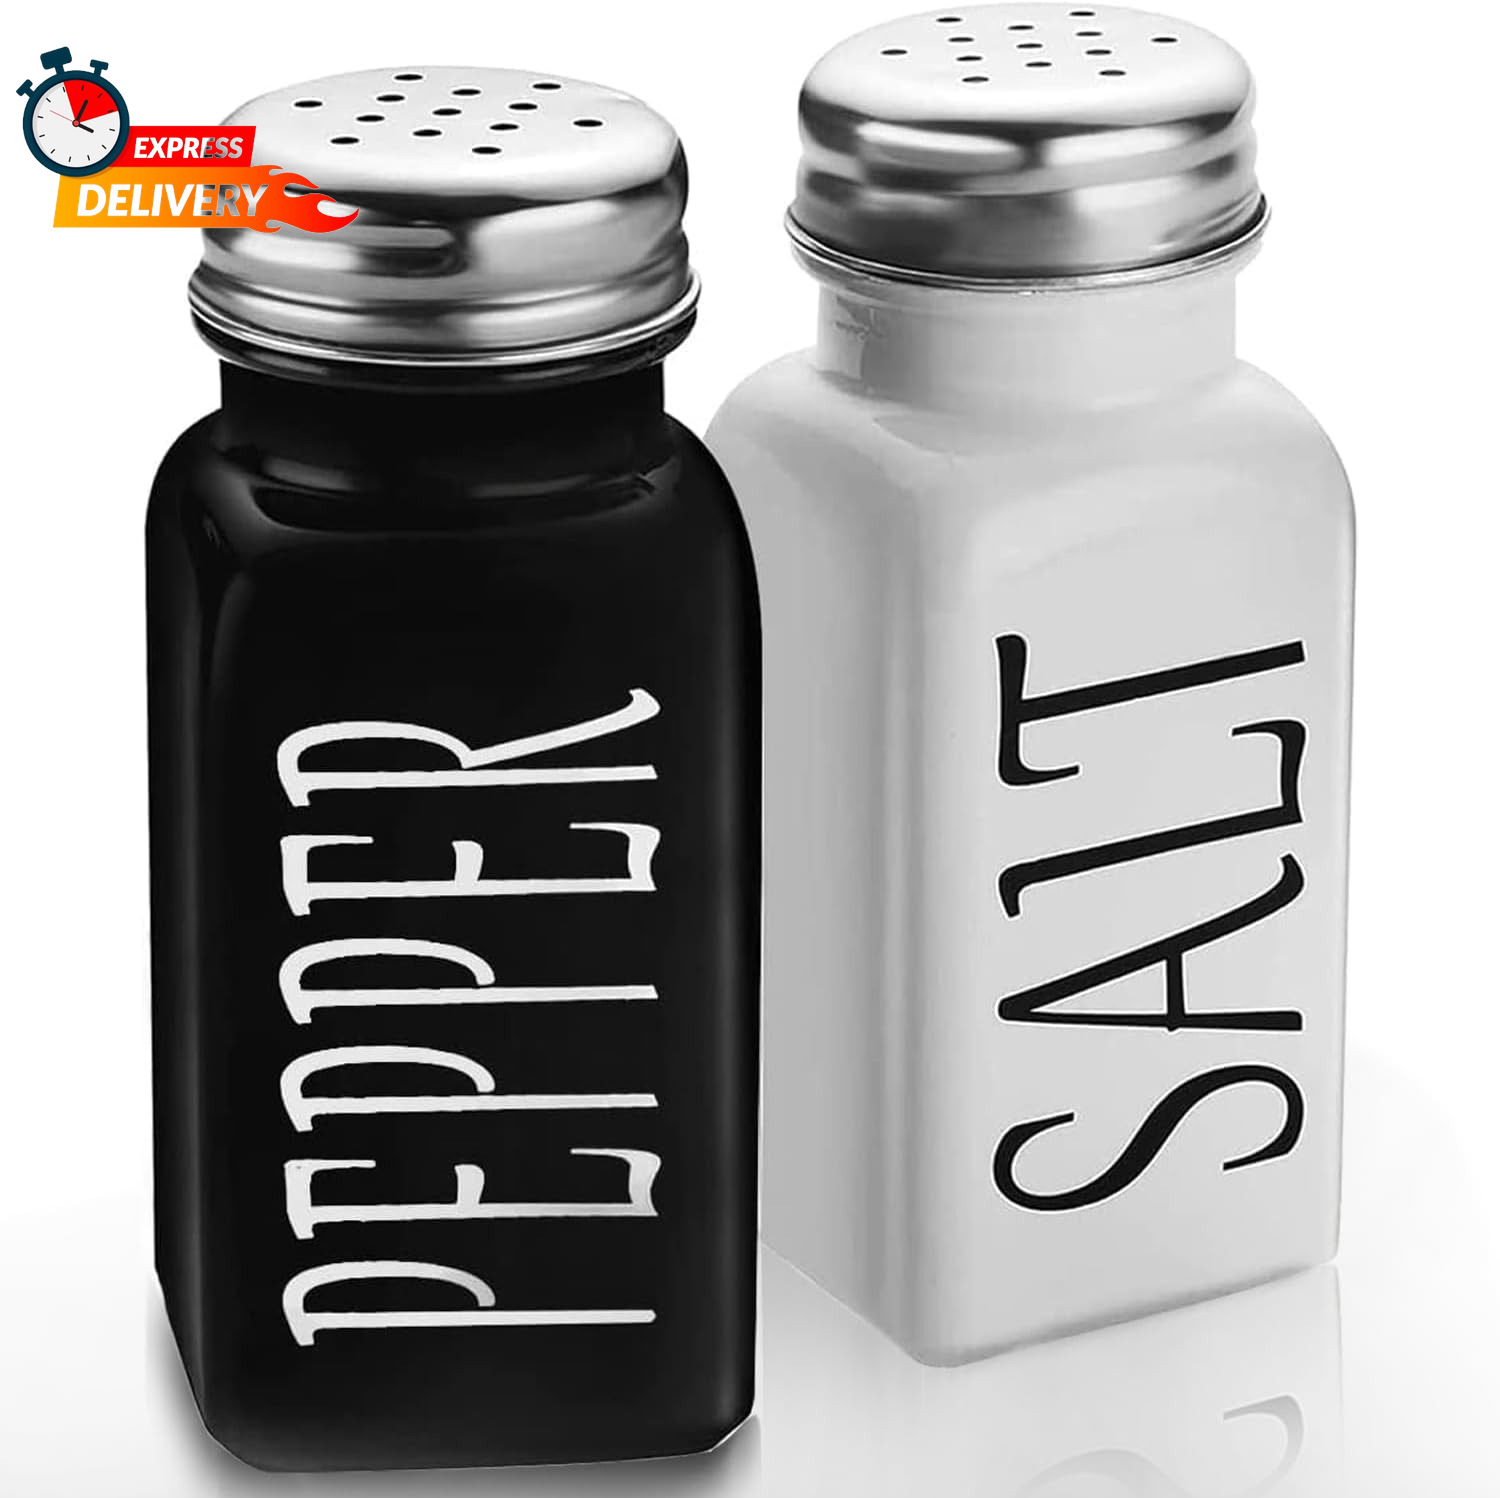 Salt and Pepper Shakers Set - Cute Salt Shakers - Vintage Glass Black and White 